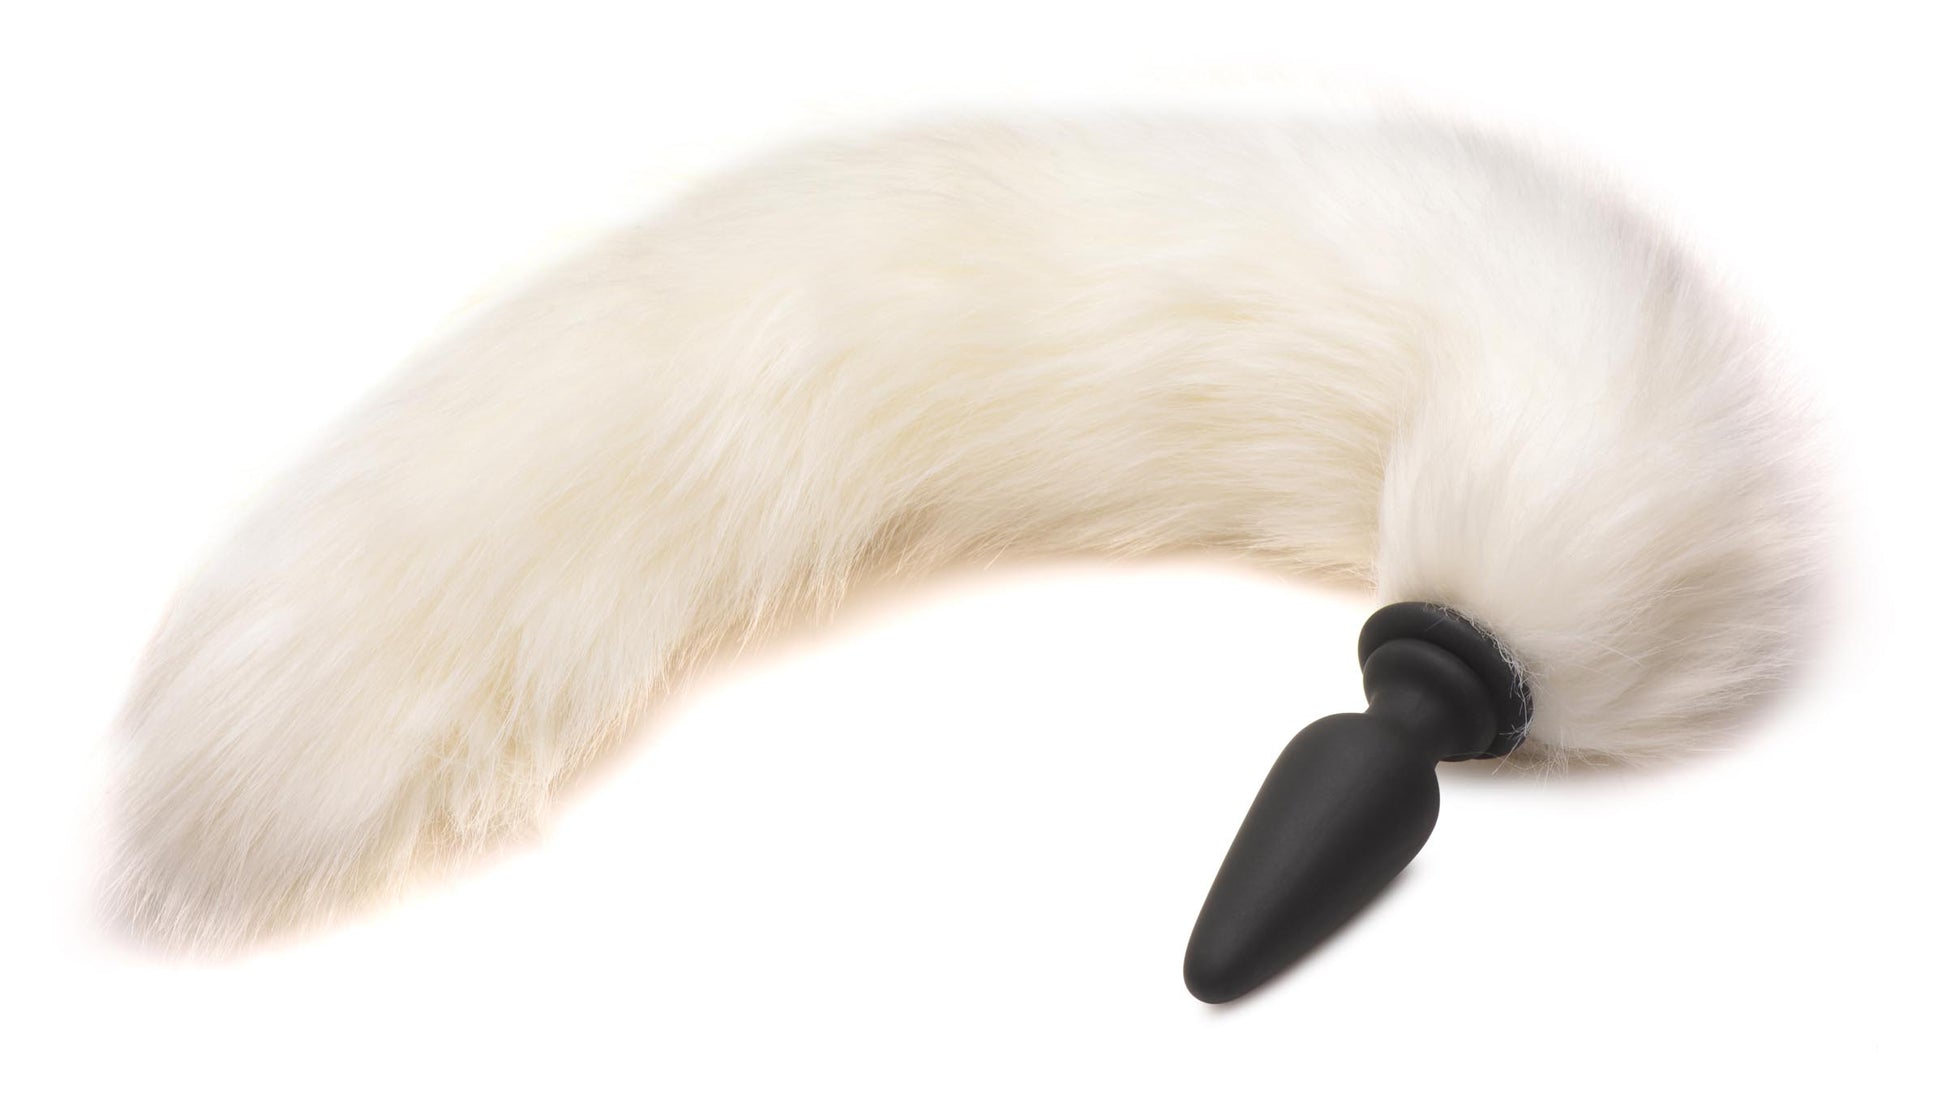 Large Anal Plug with Interchangeable Fox Tail - White - UABDSM